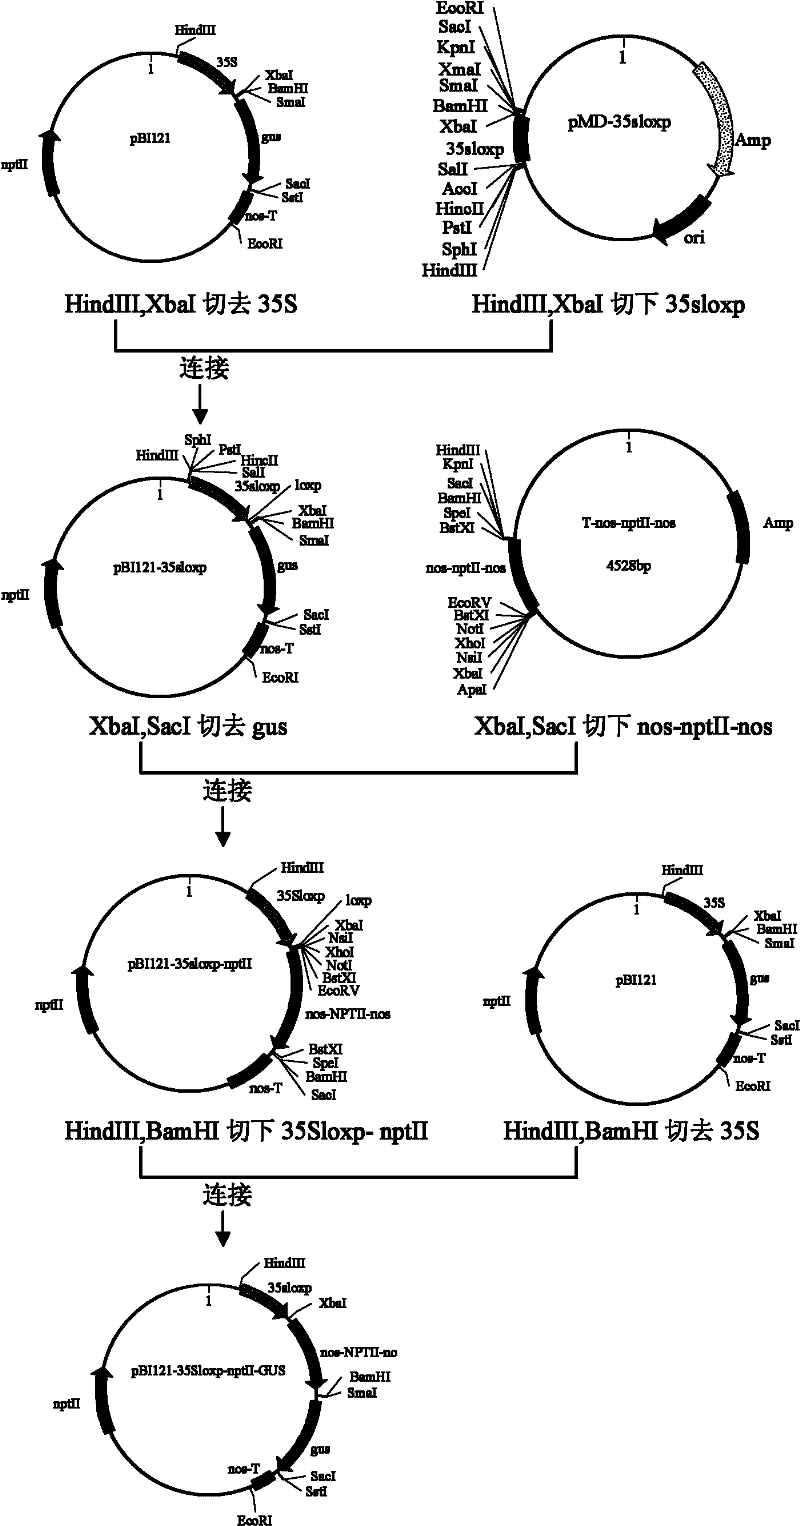 Method for obtaining transgenic Malus hupehensis rehd plant without selectable marker genes